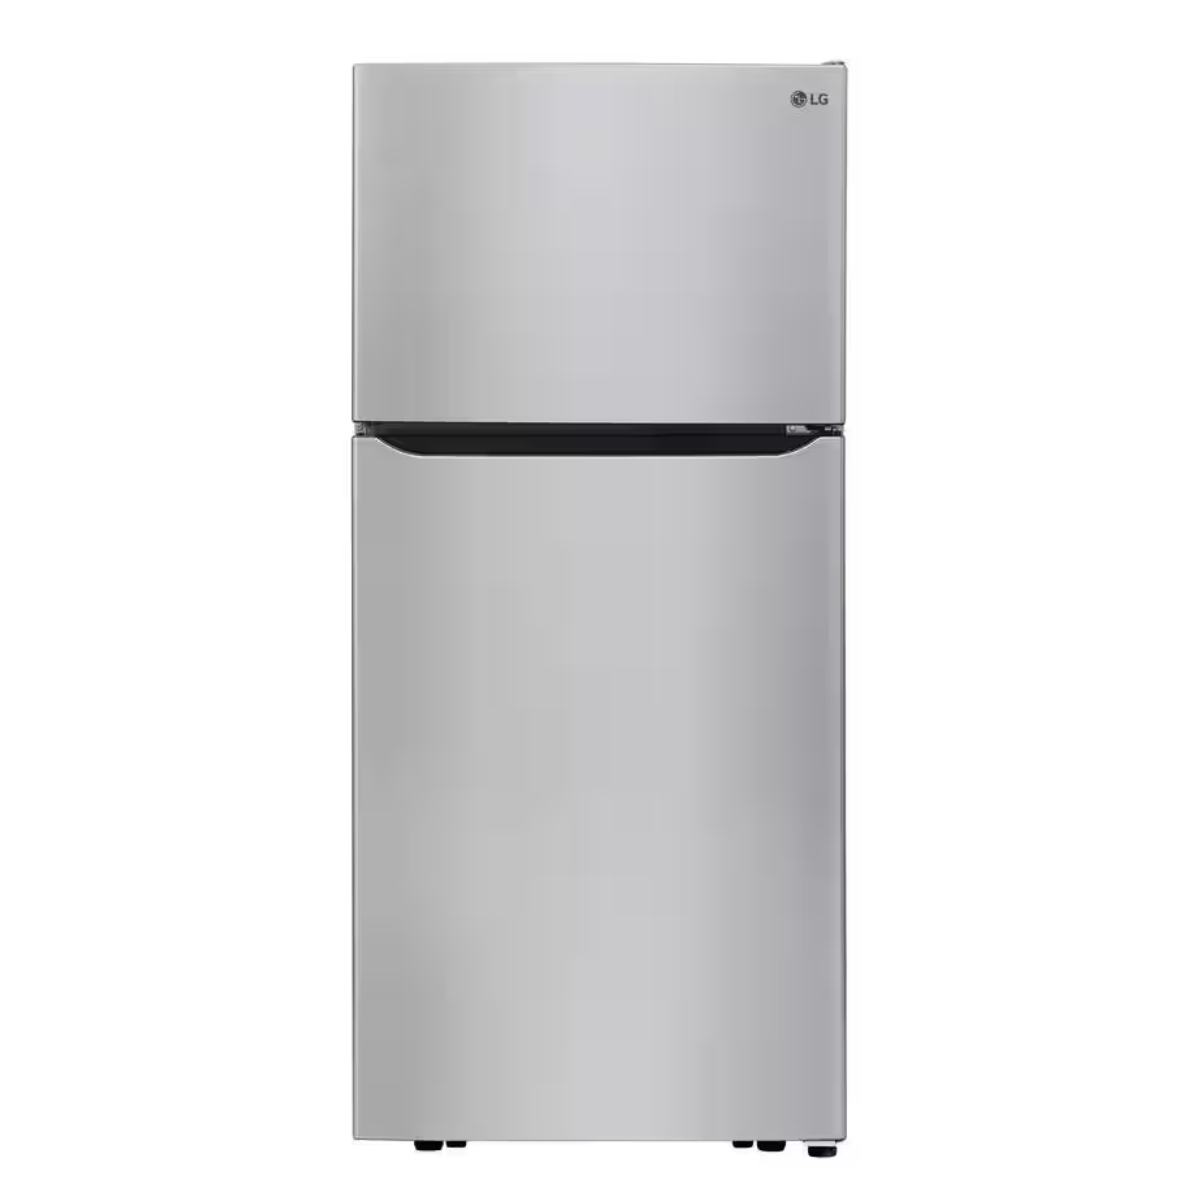 SEE ON HOME DEPOT → LG Electronics – 30 in. 20.2 cu. ft. Top Freezer Refrigerator with LED Lighting, Stainless Steel, Ice Maker